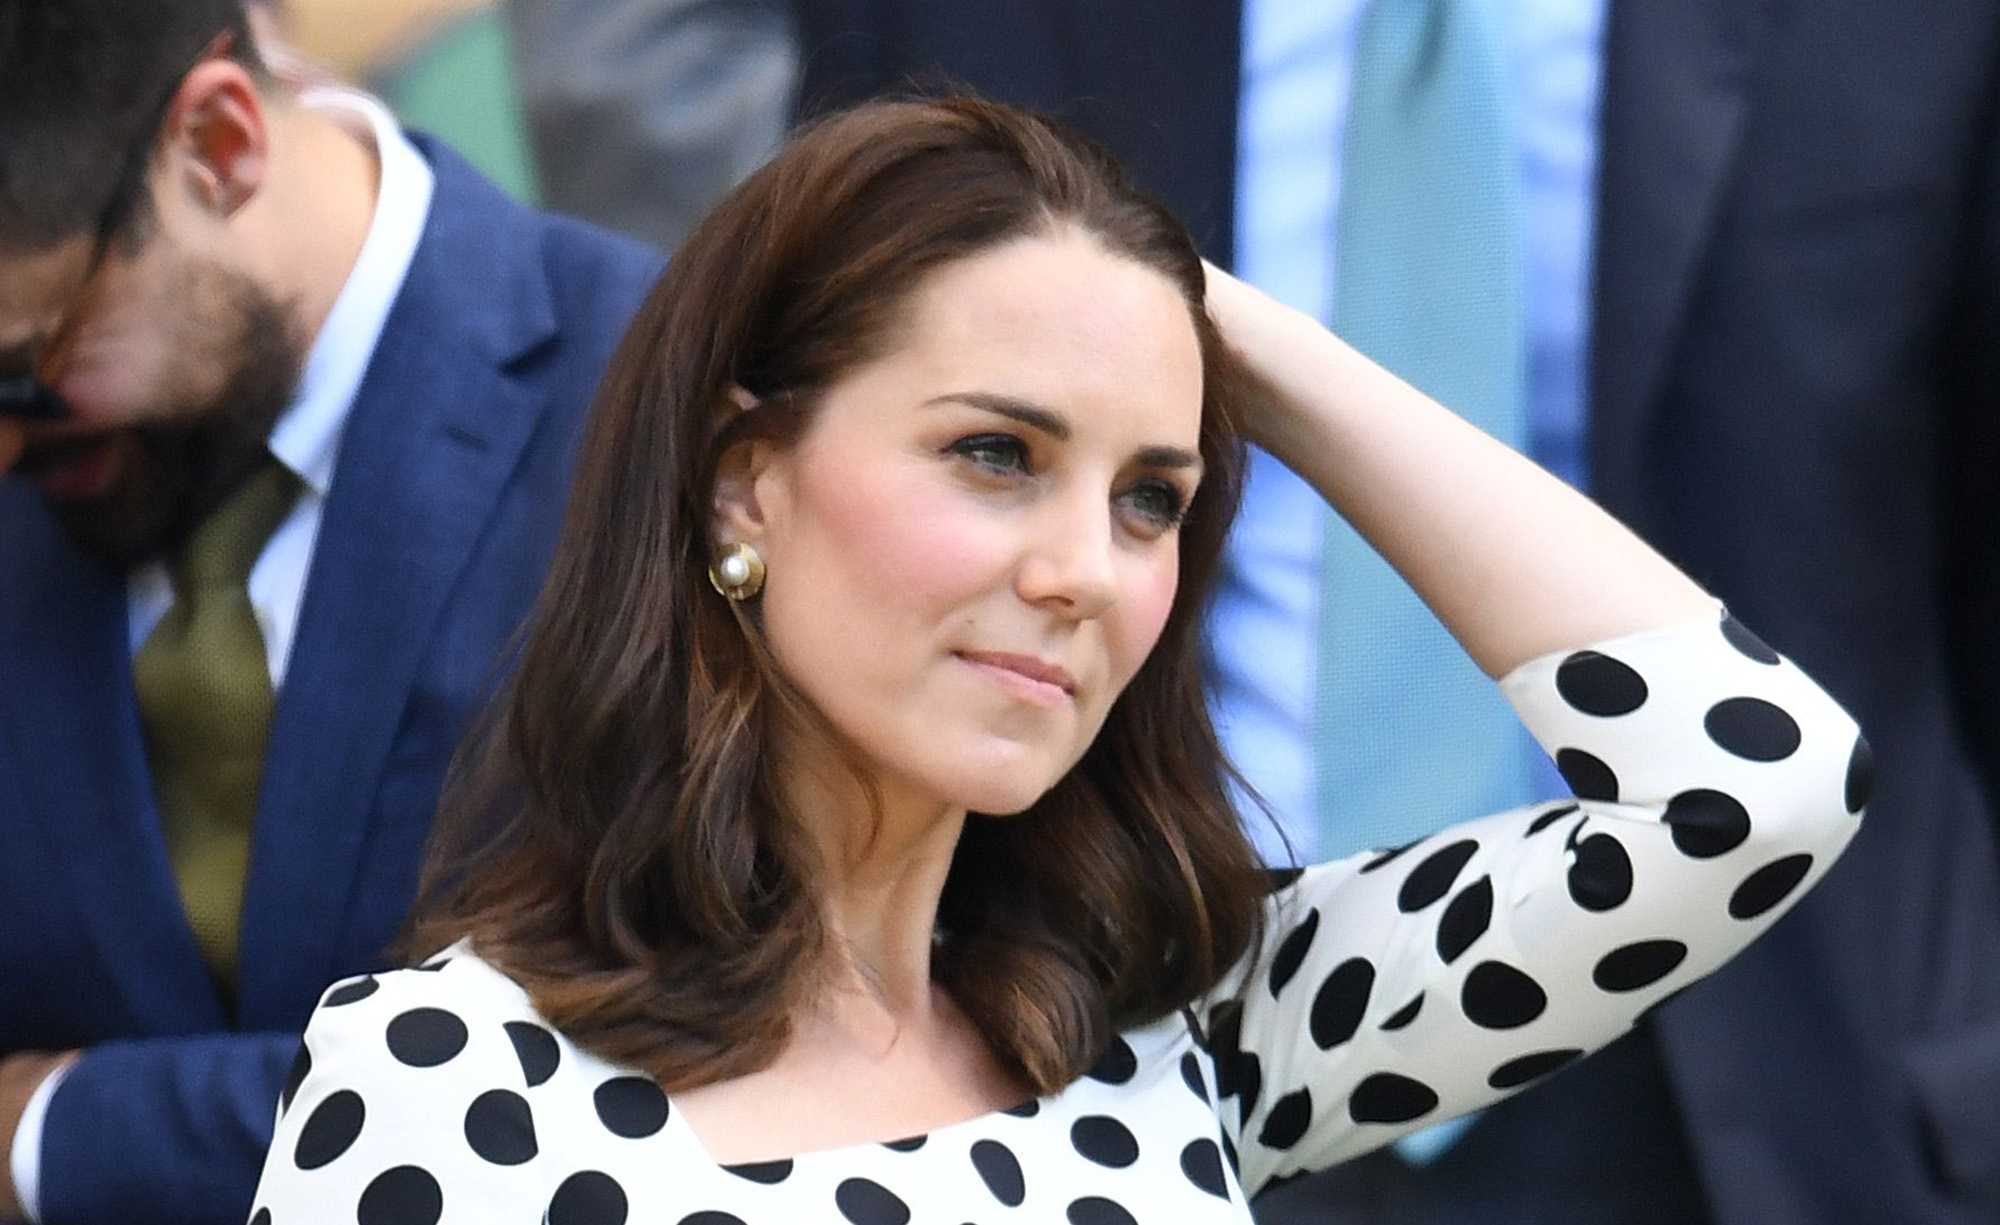 How to copy Kate Middleton's half up half down hairstyle